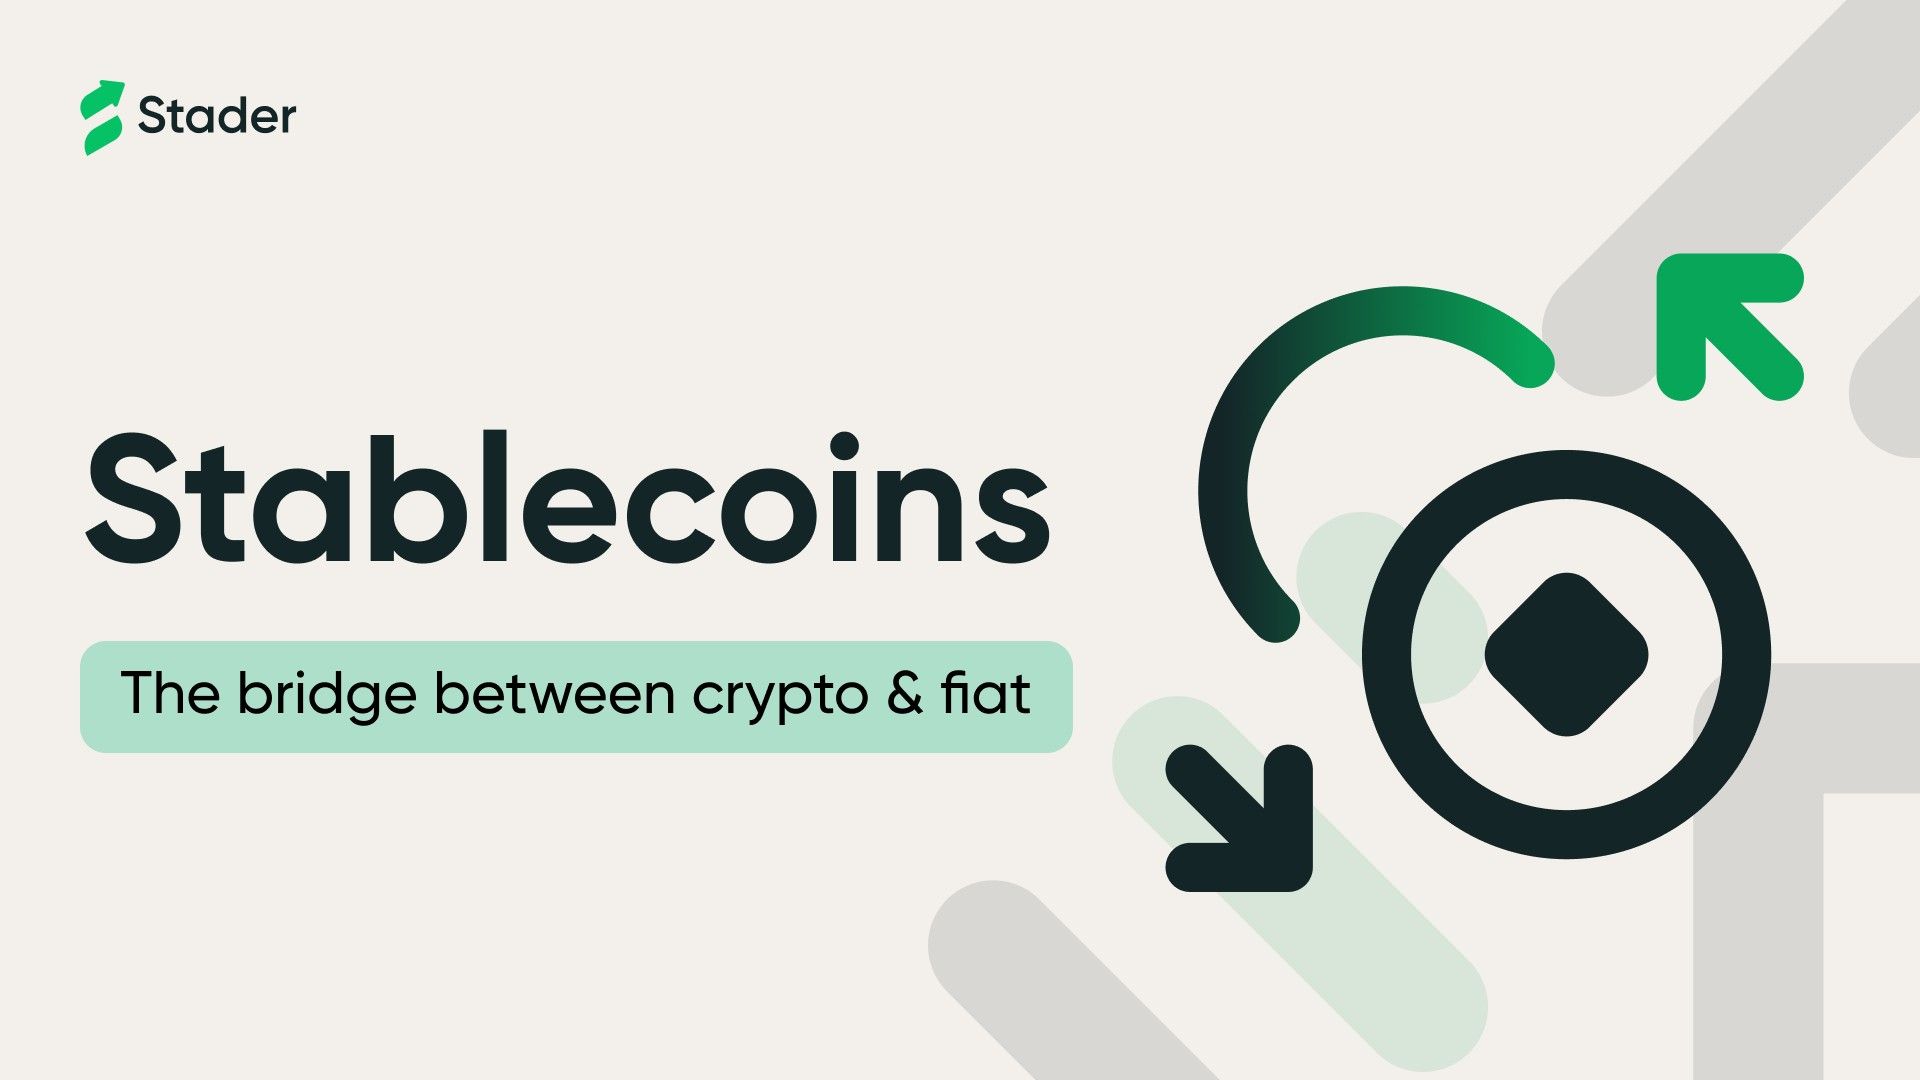 Stablecoin — The bridge between Crypto & Fiat